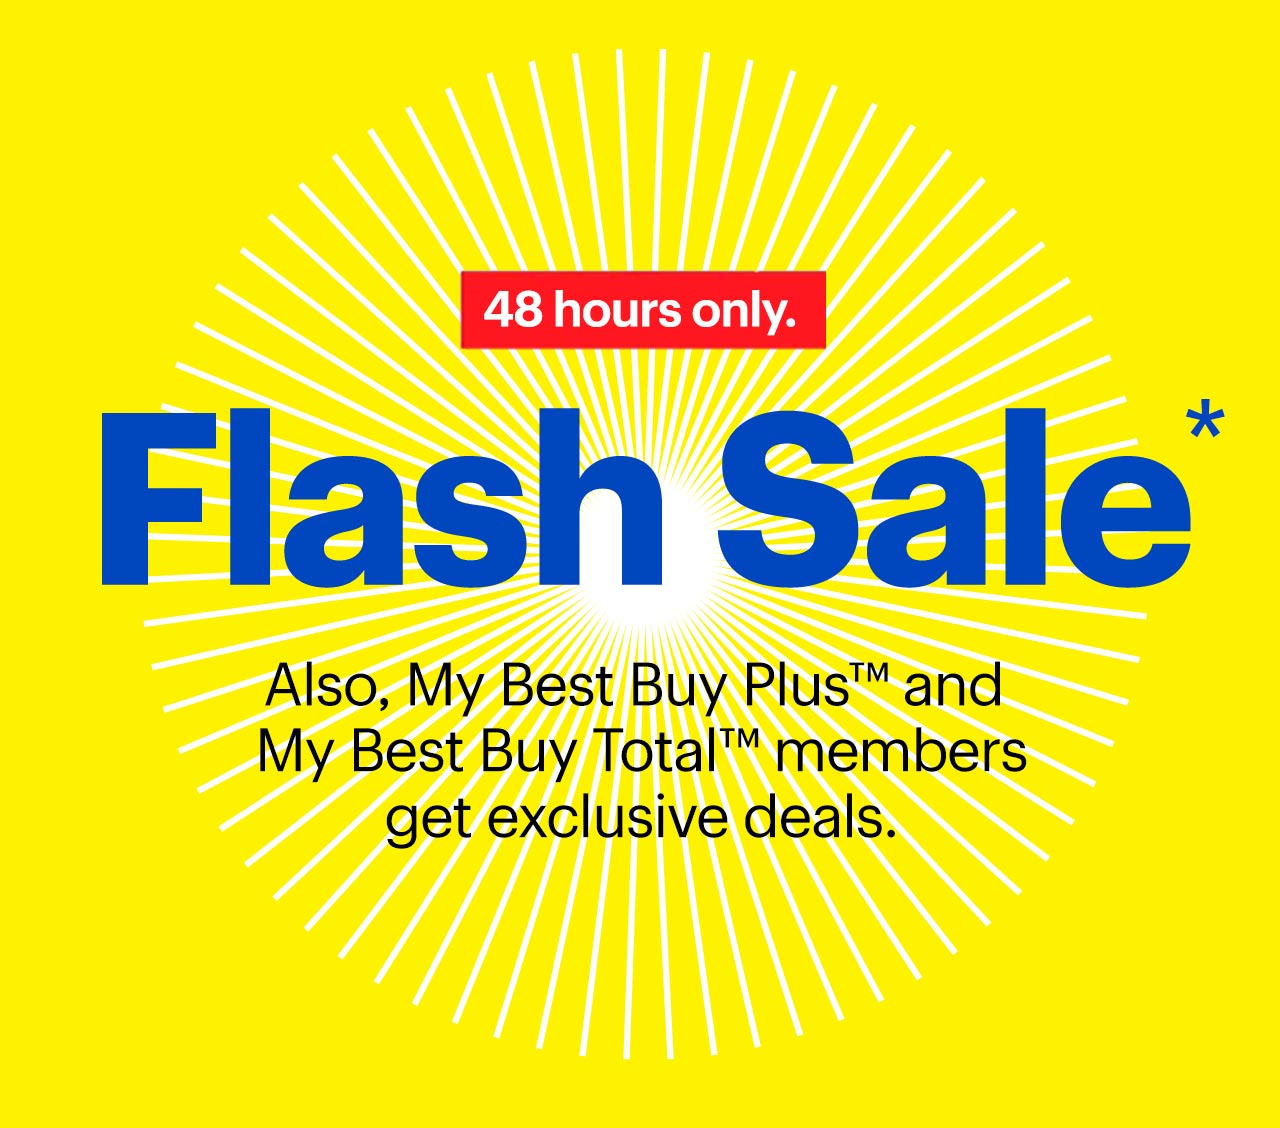 Flash Sale. Also, My Best Buy Plus™ and My Best Buy Total™ members get exclusive deals. 48 hours only. Reference disclaimer.